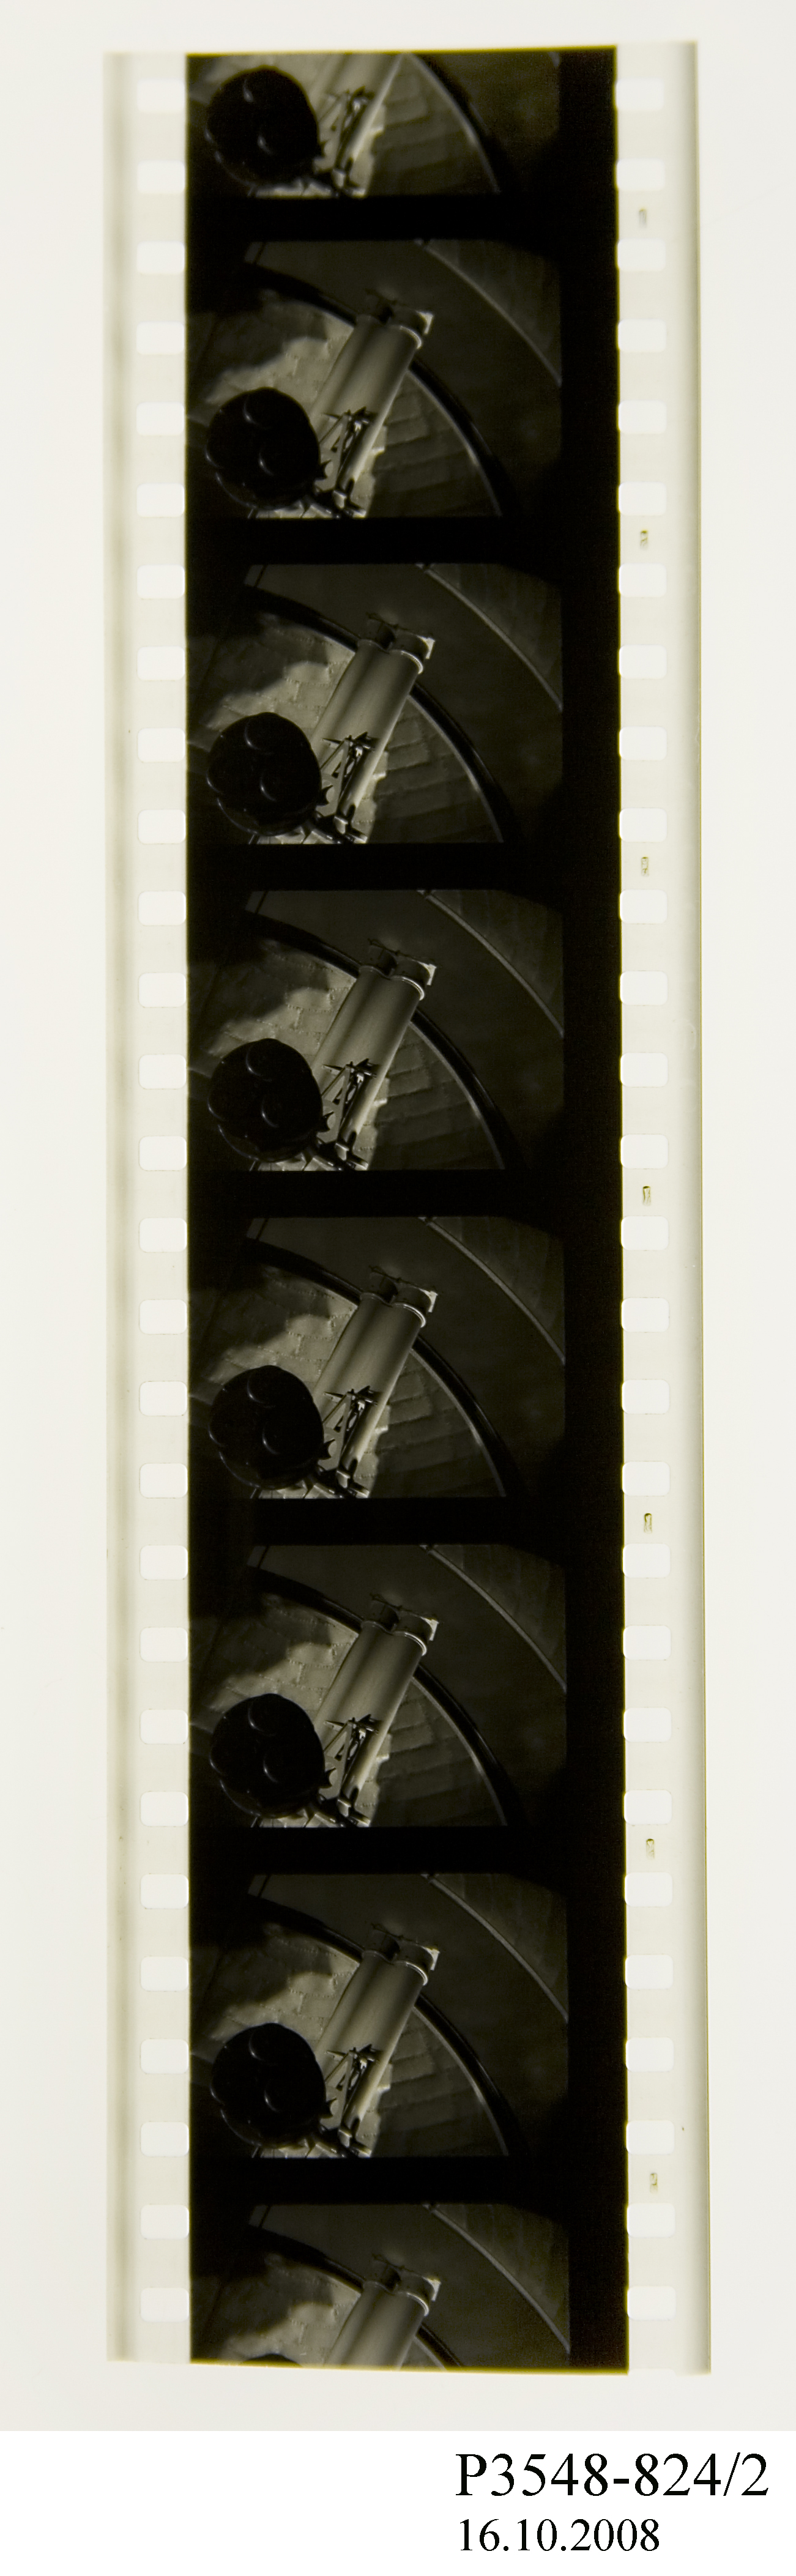 Film strip showing a telescope in an observation dome